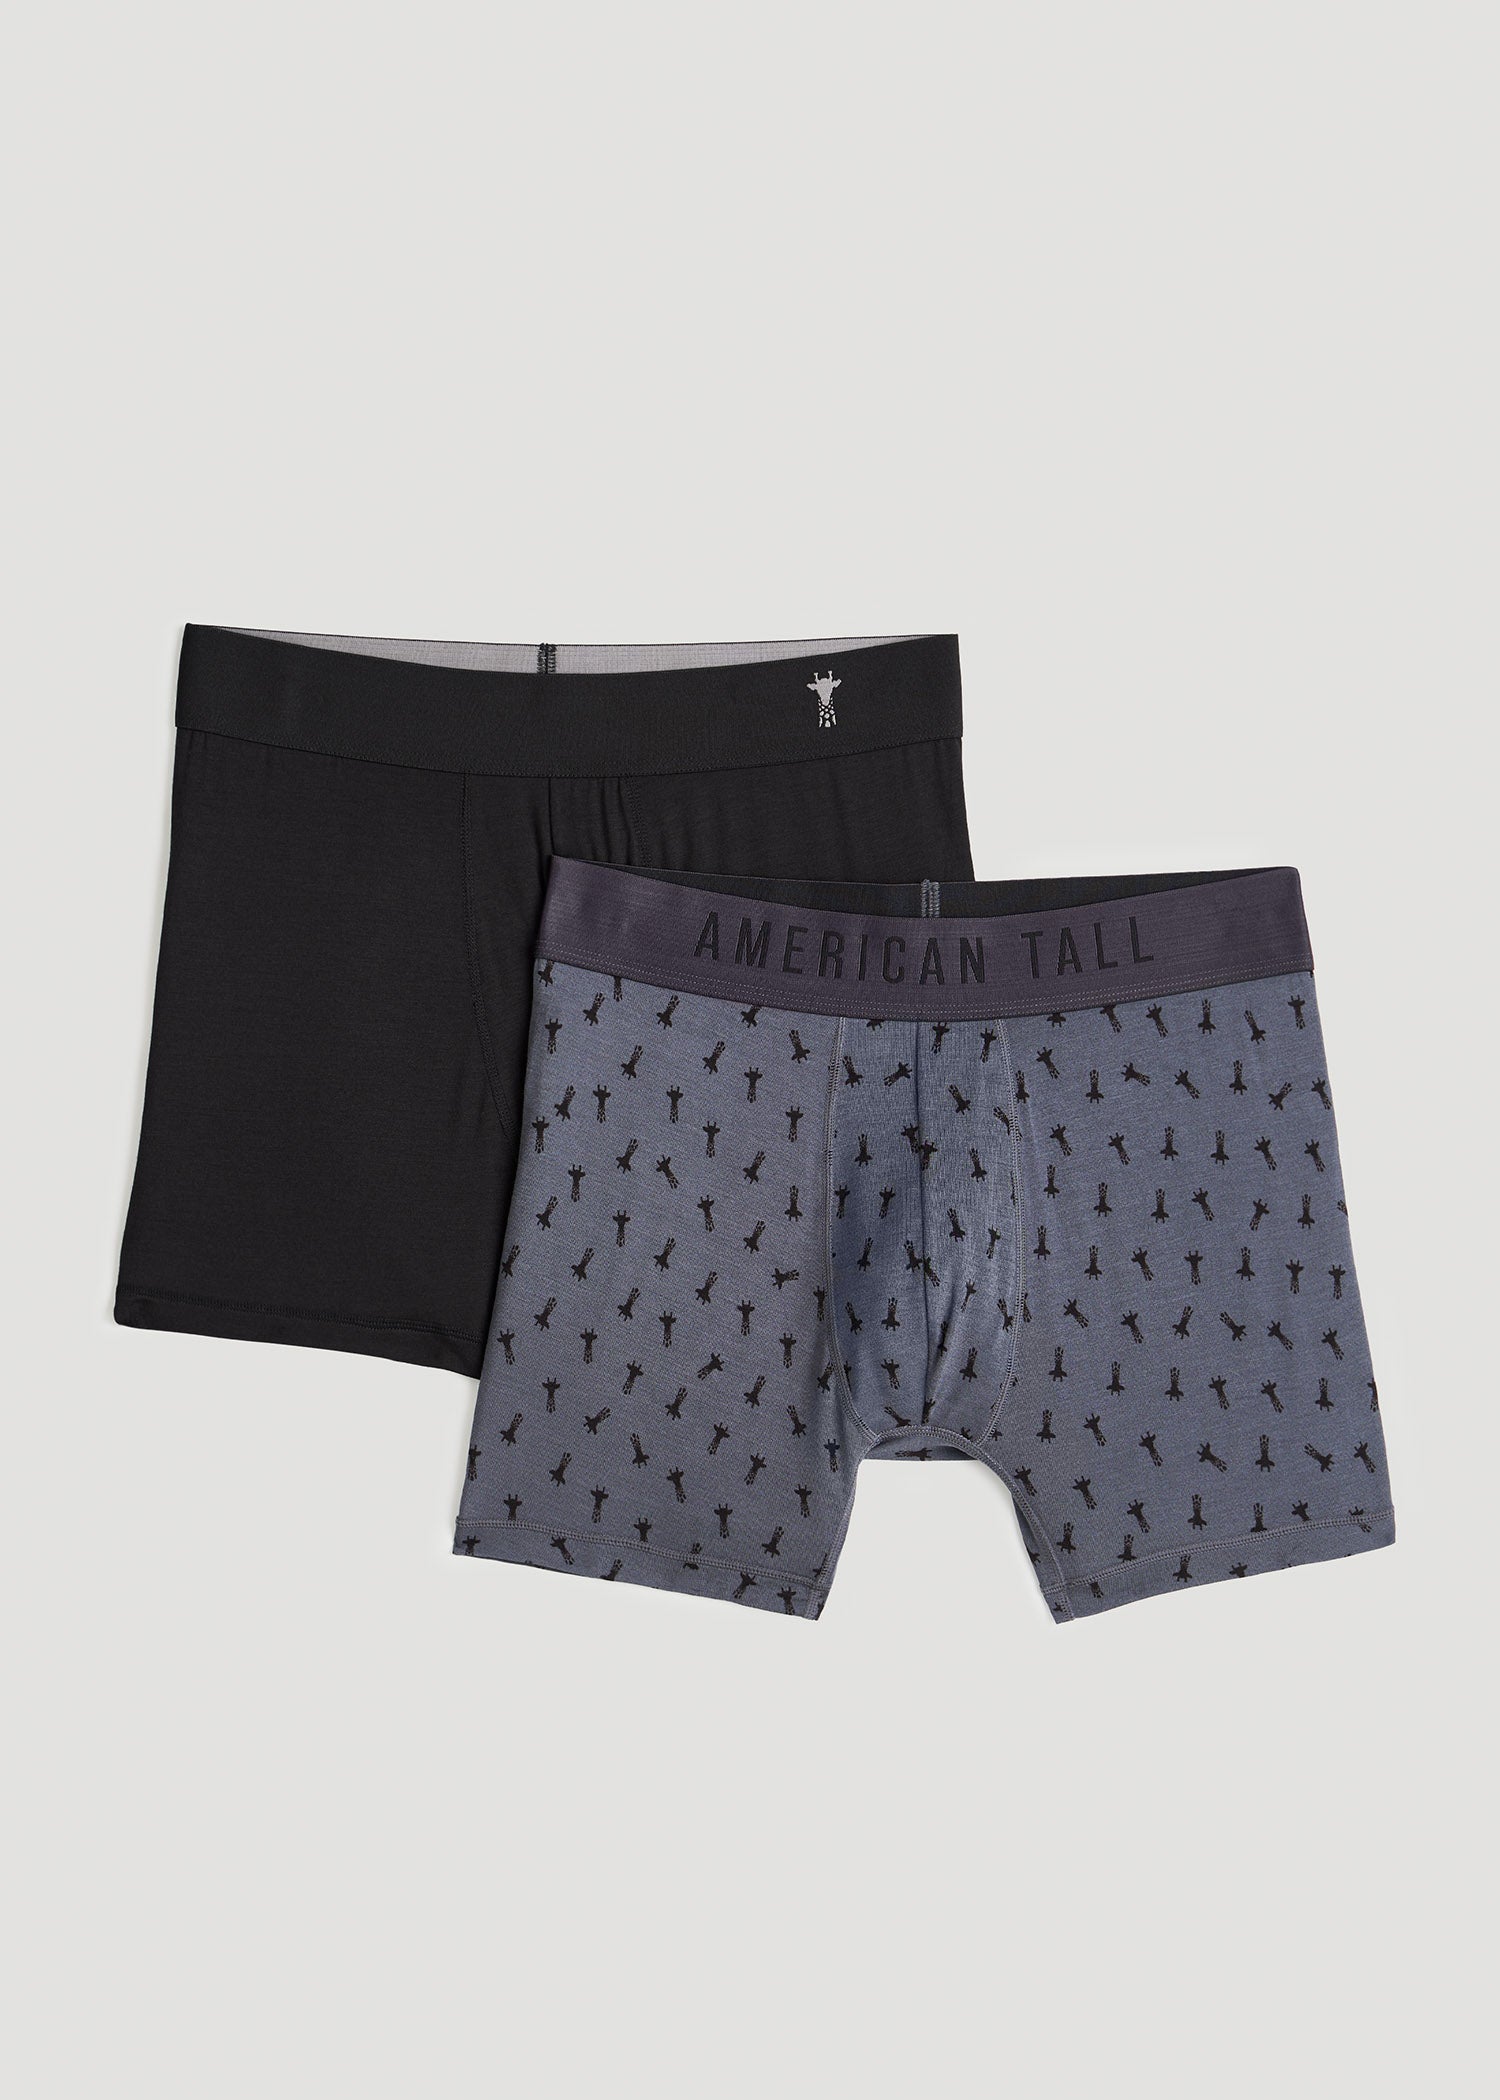 Micro Modal Extra-Long Boxer Briefs in Lake Print & Storm Blue (2